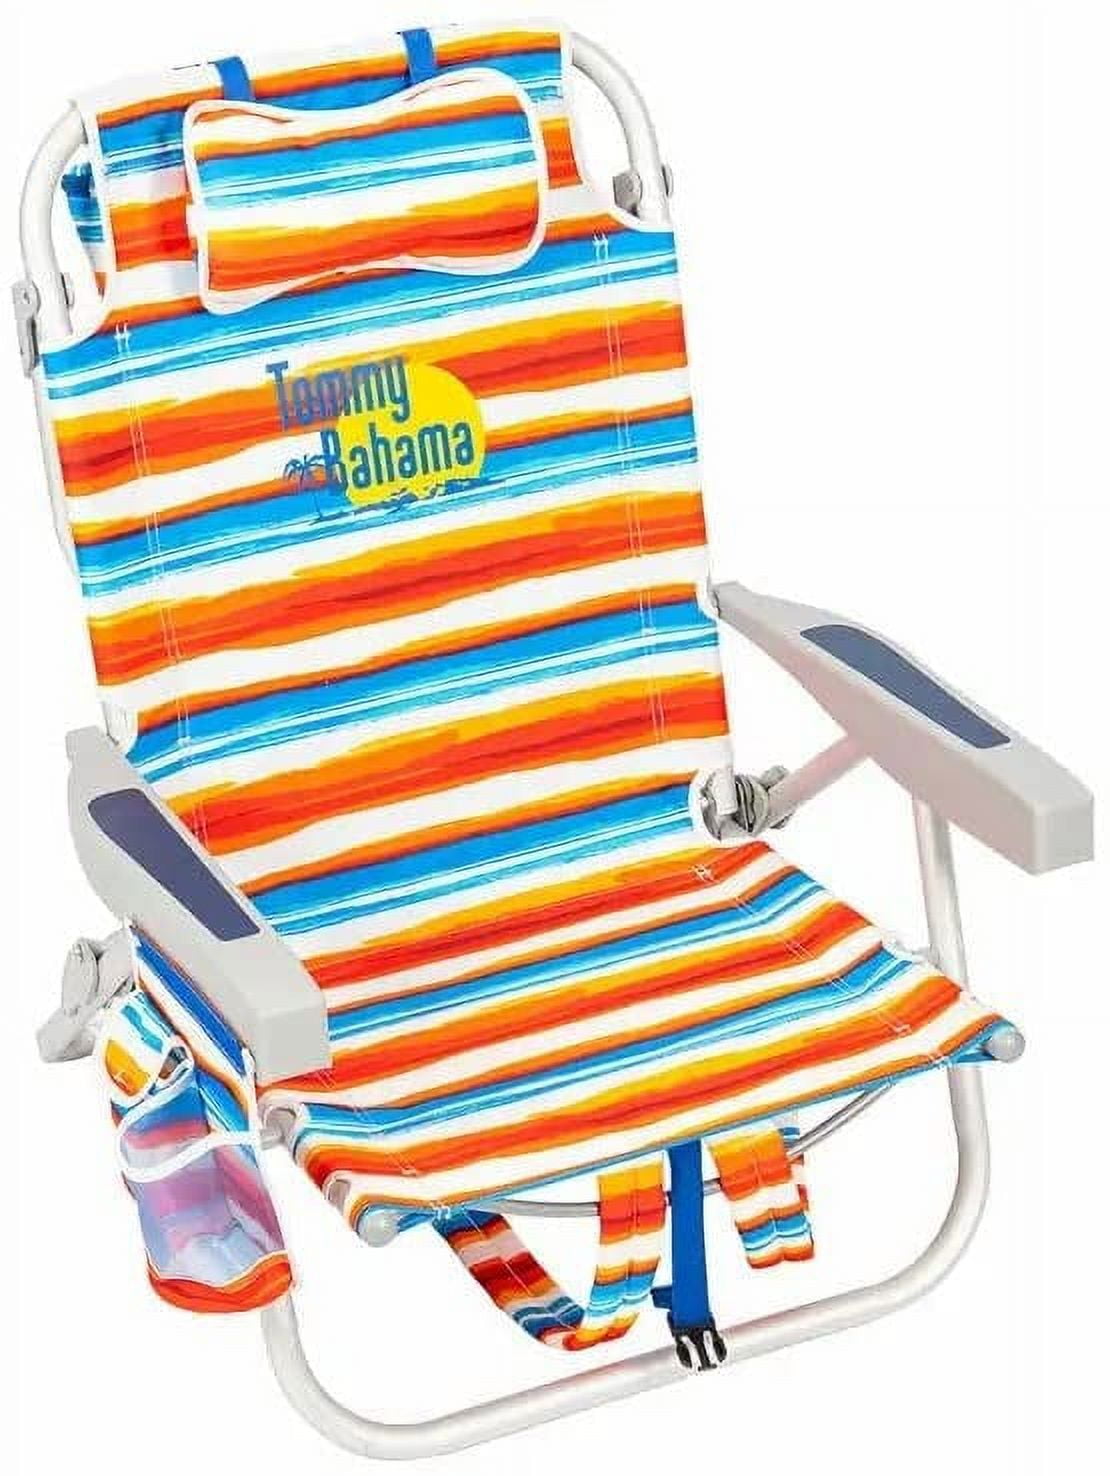 Tommy Bahama Sunny Blossom Deluxe Backpack Beach Chair